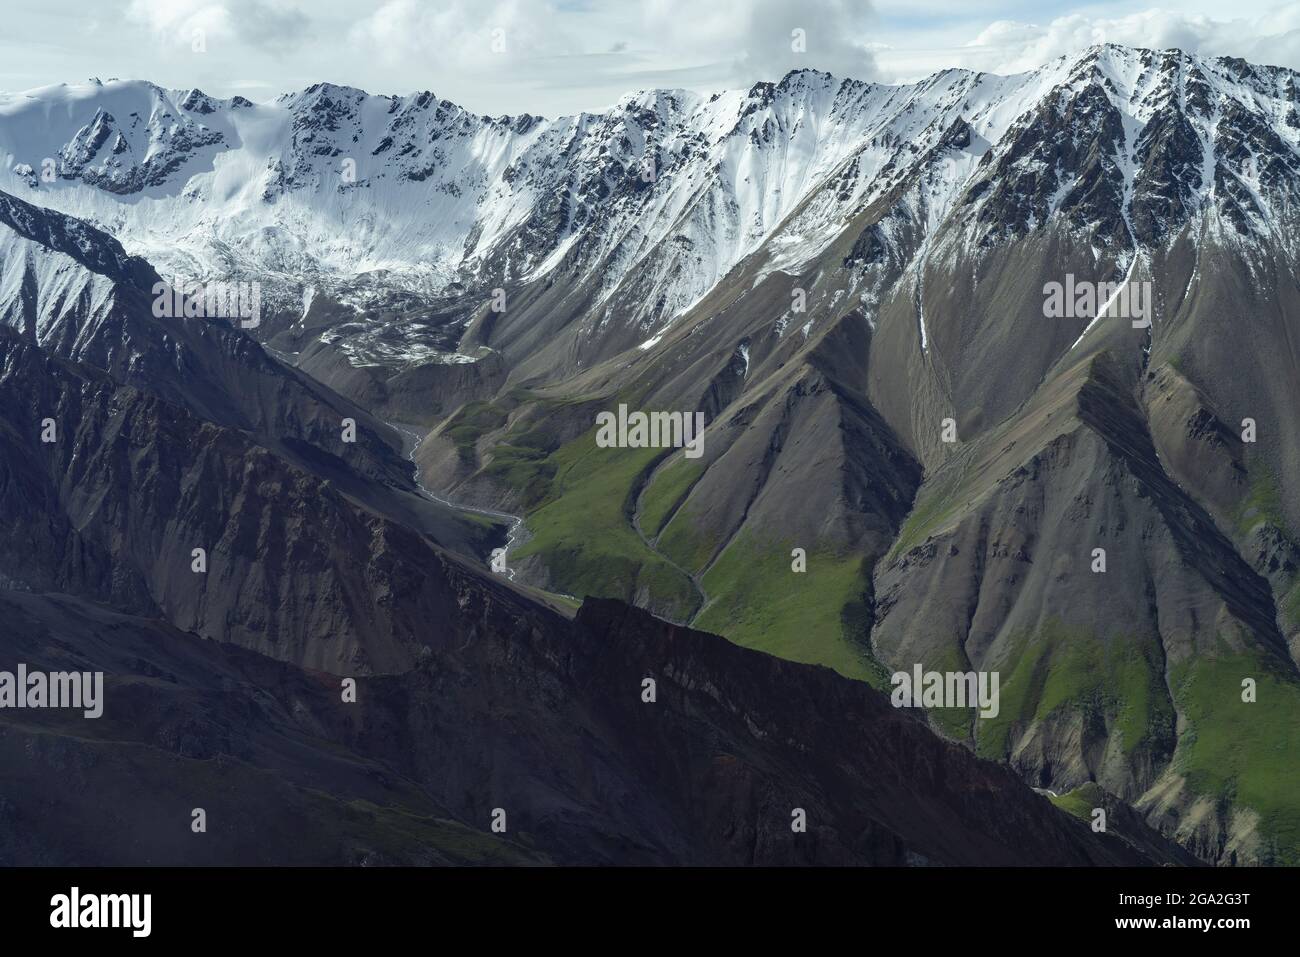 Aerial of slopes of ancient sedimentary and volcanic rock with green vegetation and snowcapped mountain peaks on the horizon, situated in the Tradi... Stock Photo